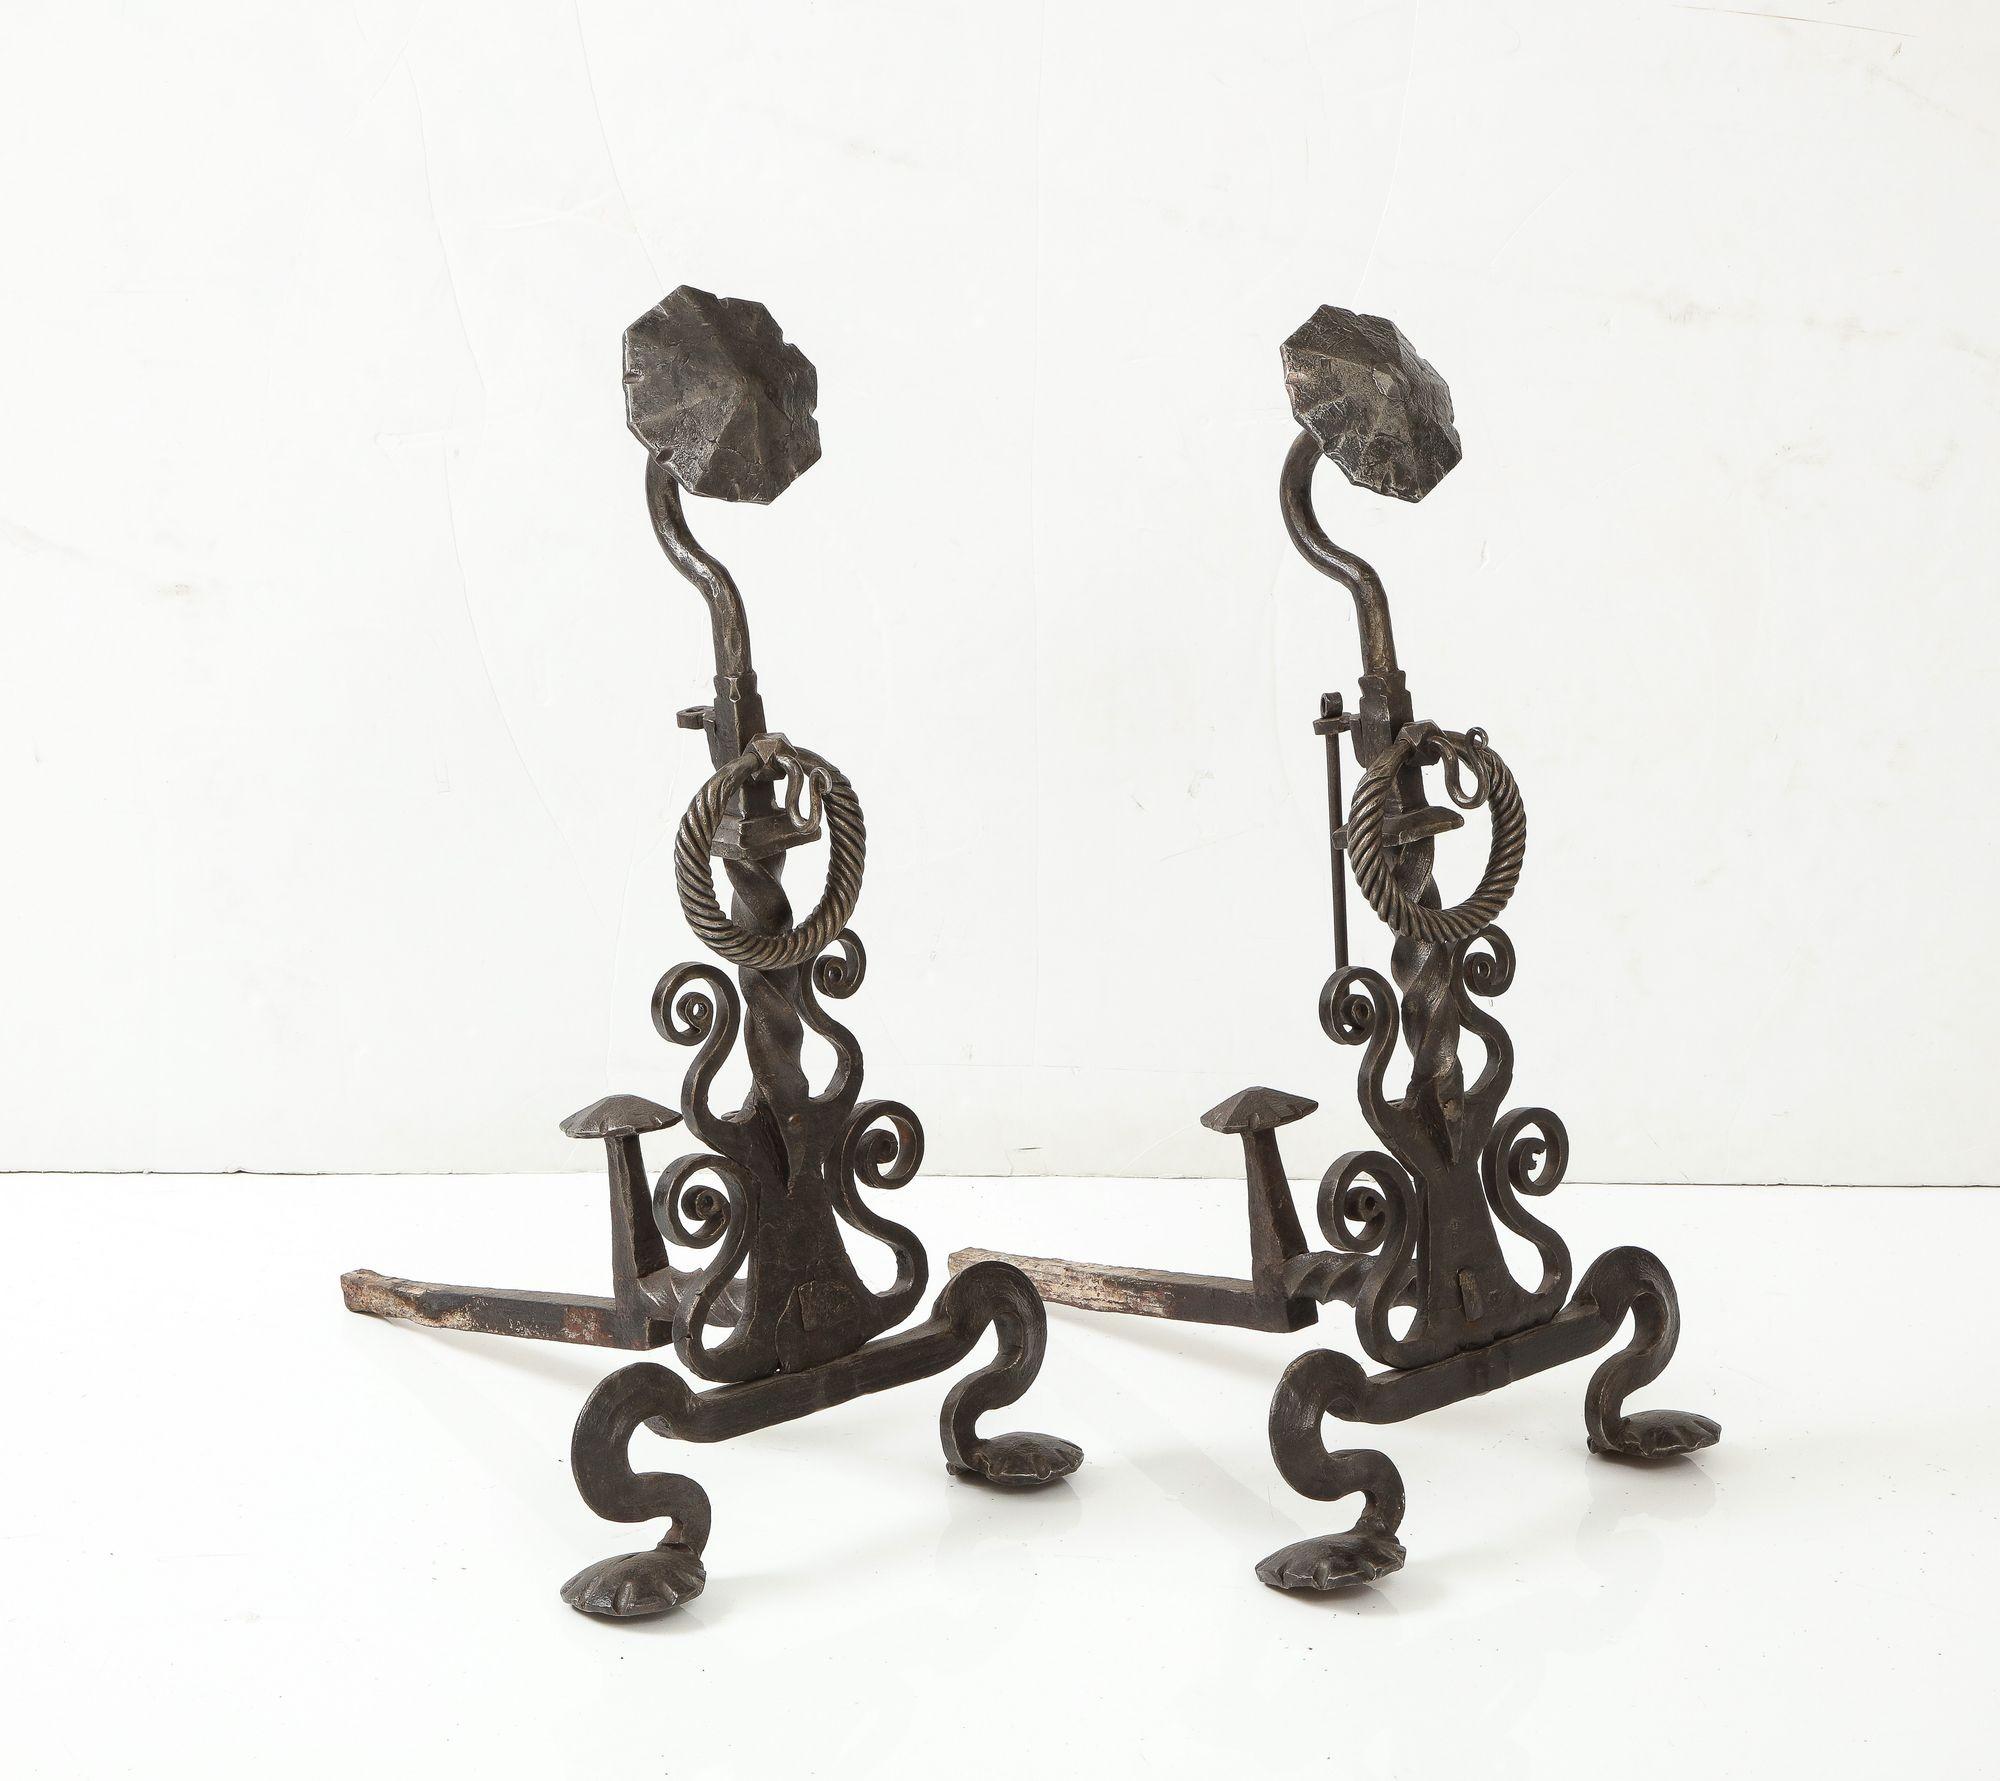 A monumental pair of iron andirons with wonderful hand forged scrolled body and legs, topped by bold octagonal finials on gooseneck heads with finely wrought rope-effect iron rings below. Very large and substantial. American, circa 1880.